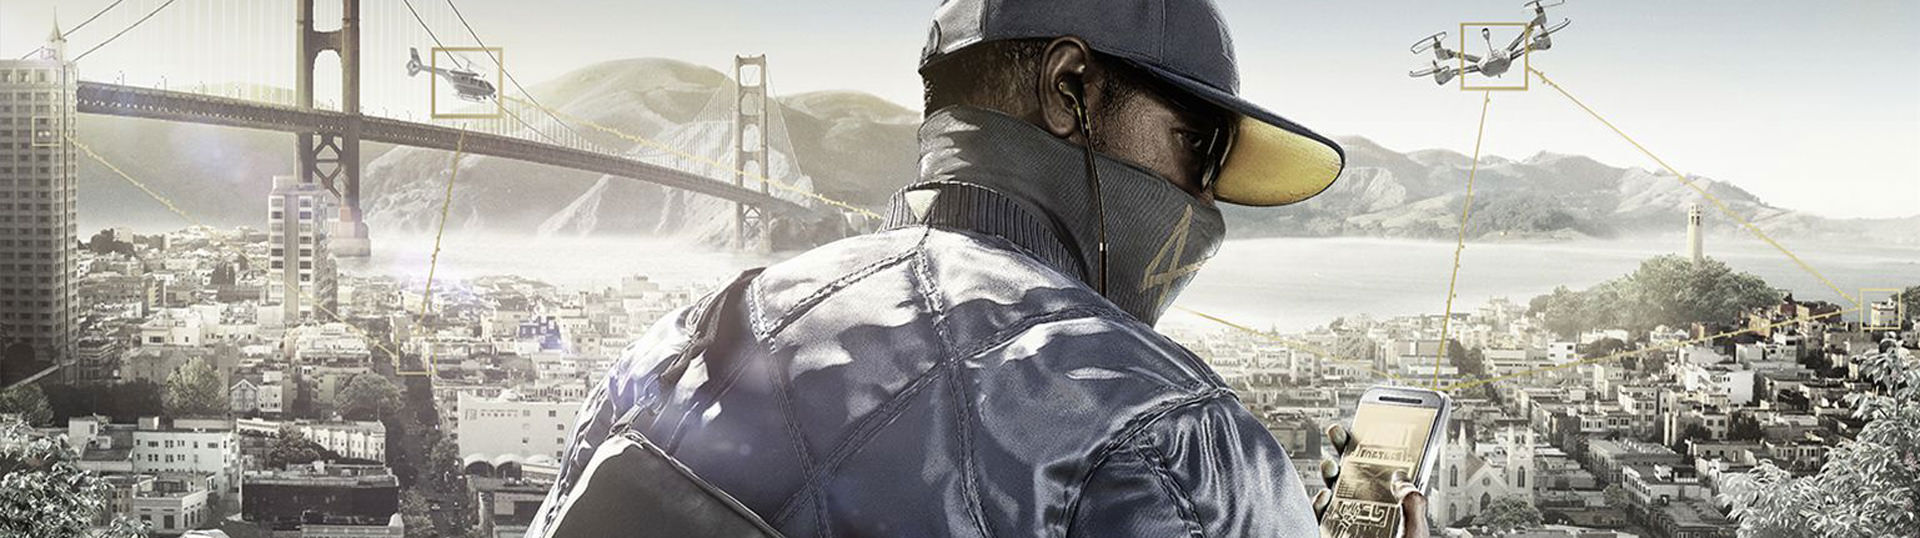 Buy Watch_Dogs 2 Gold Edition for PS4, Xbox One and PC | Ubisoft 